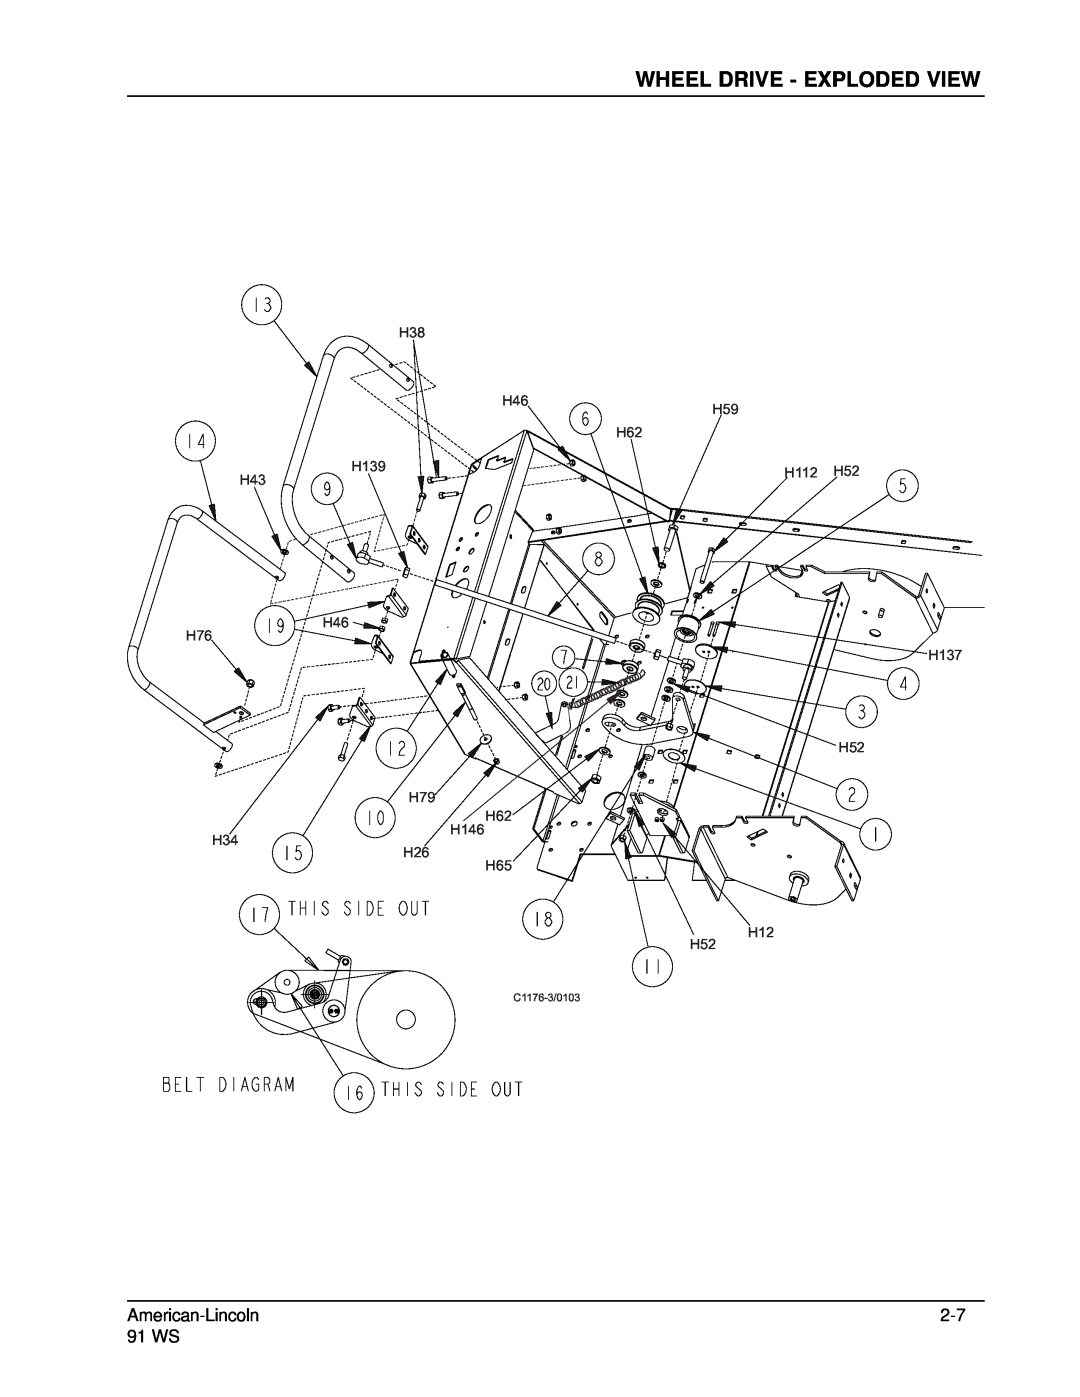 Nilfisk-ALTO 91WS manual Wheel Drive - Exploded View, American-Lincoln, 91 WS 